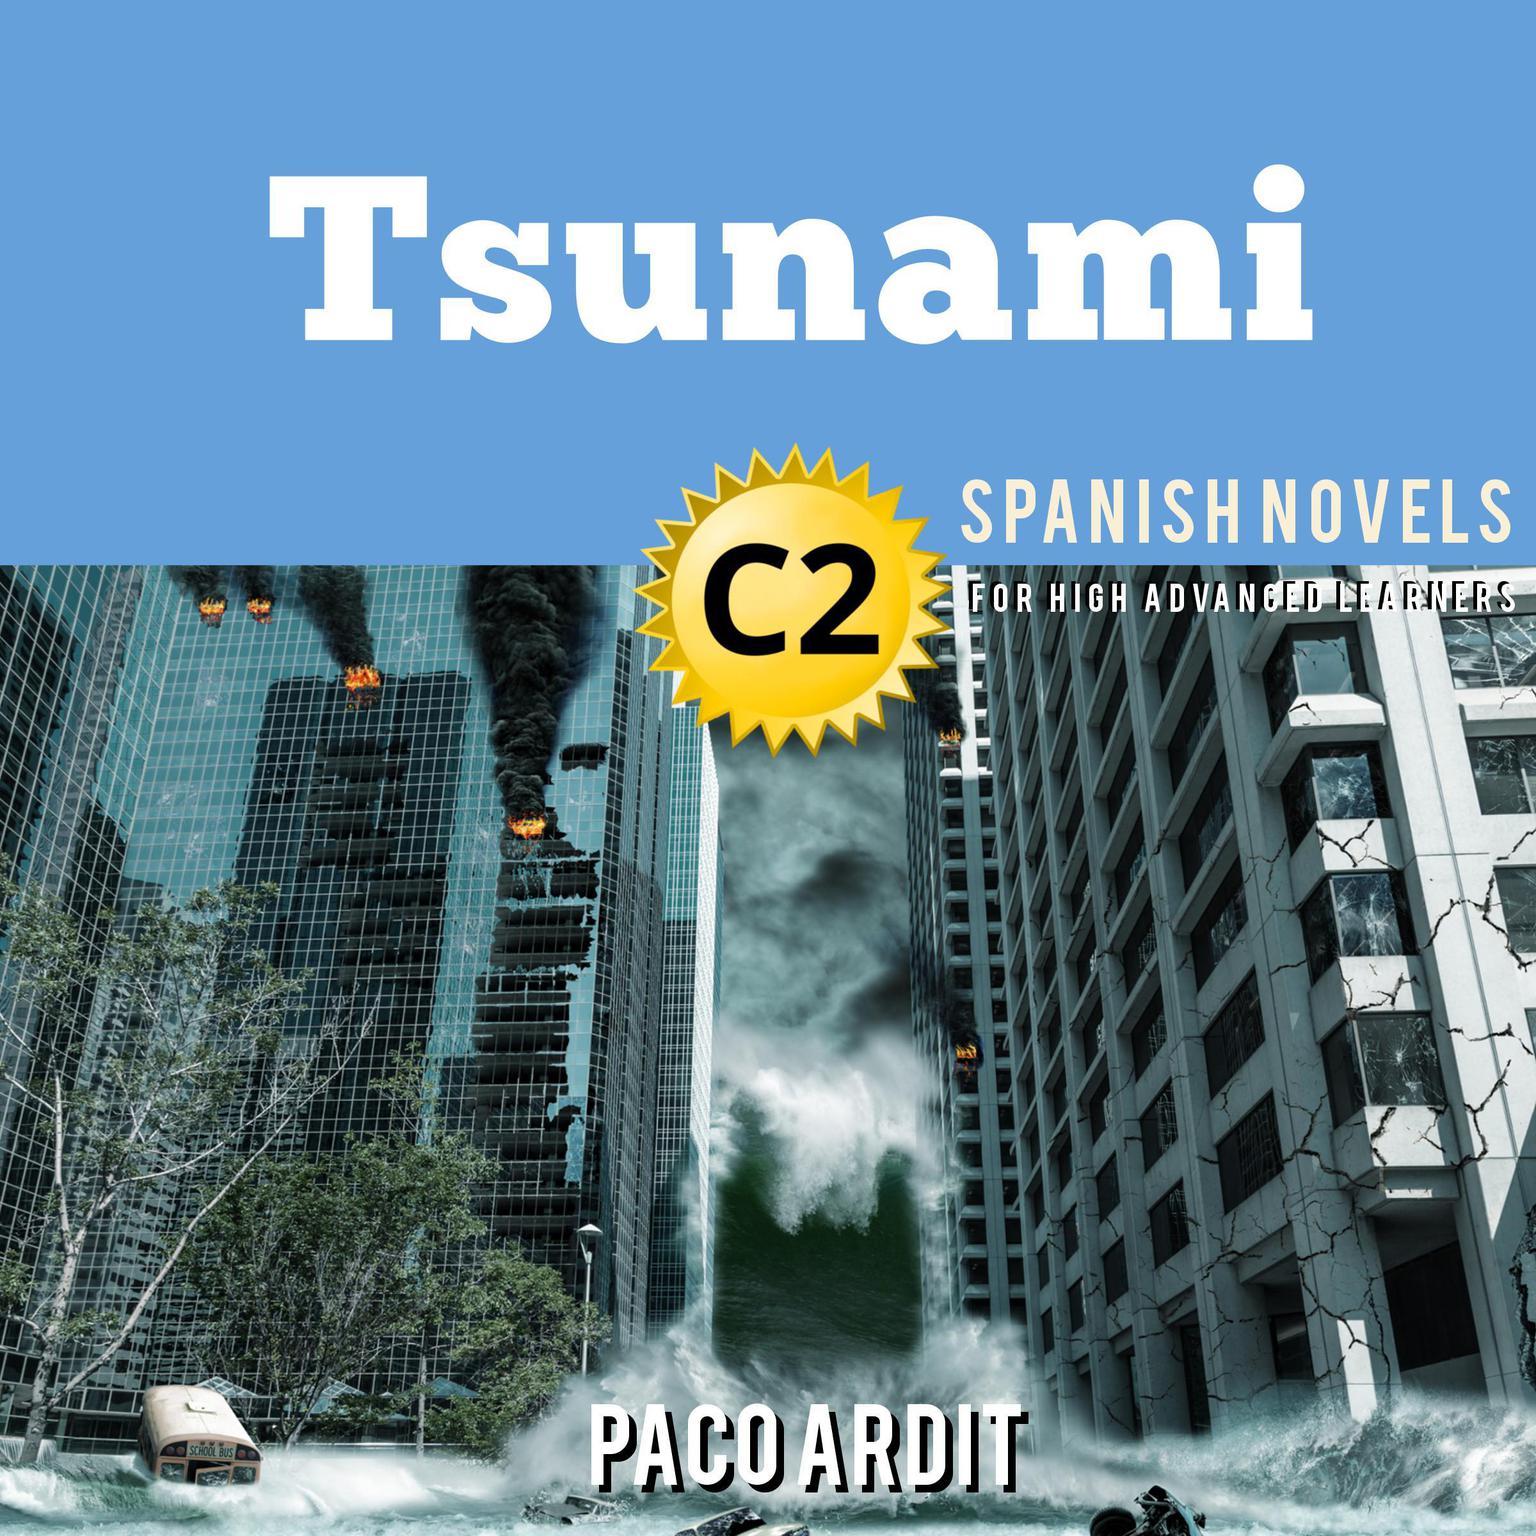 Tsunami Audiobook, by Paco Ardit